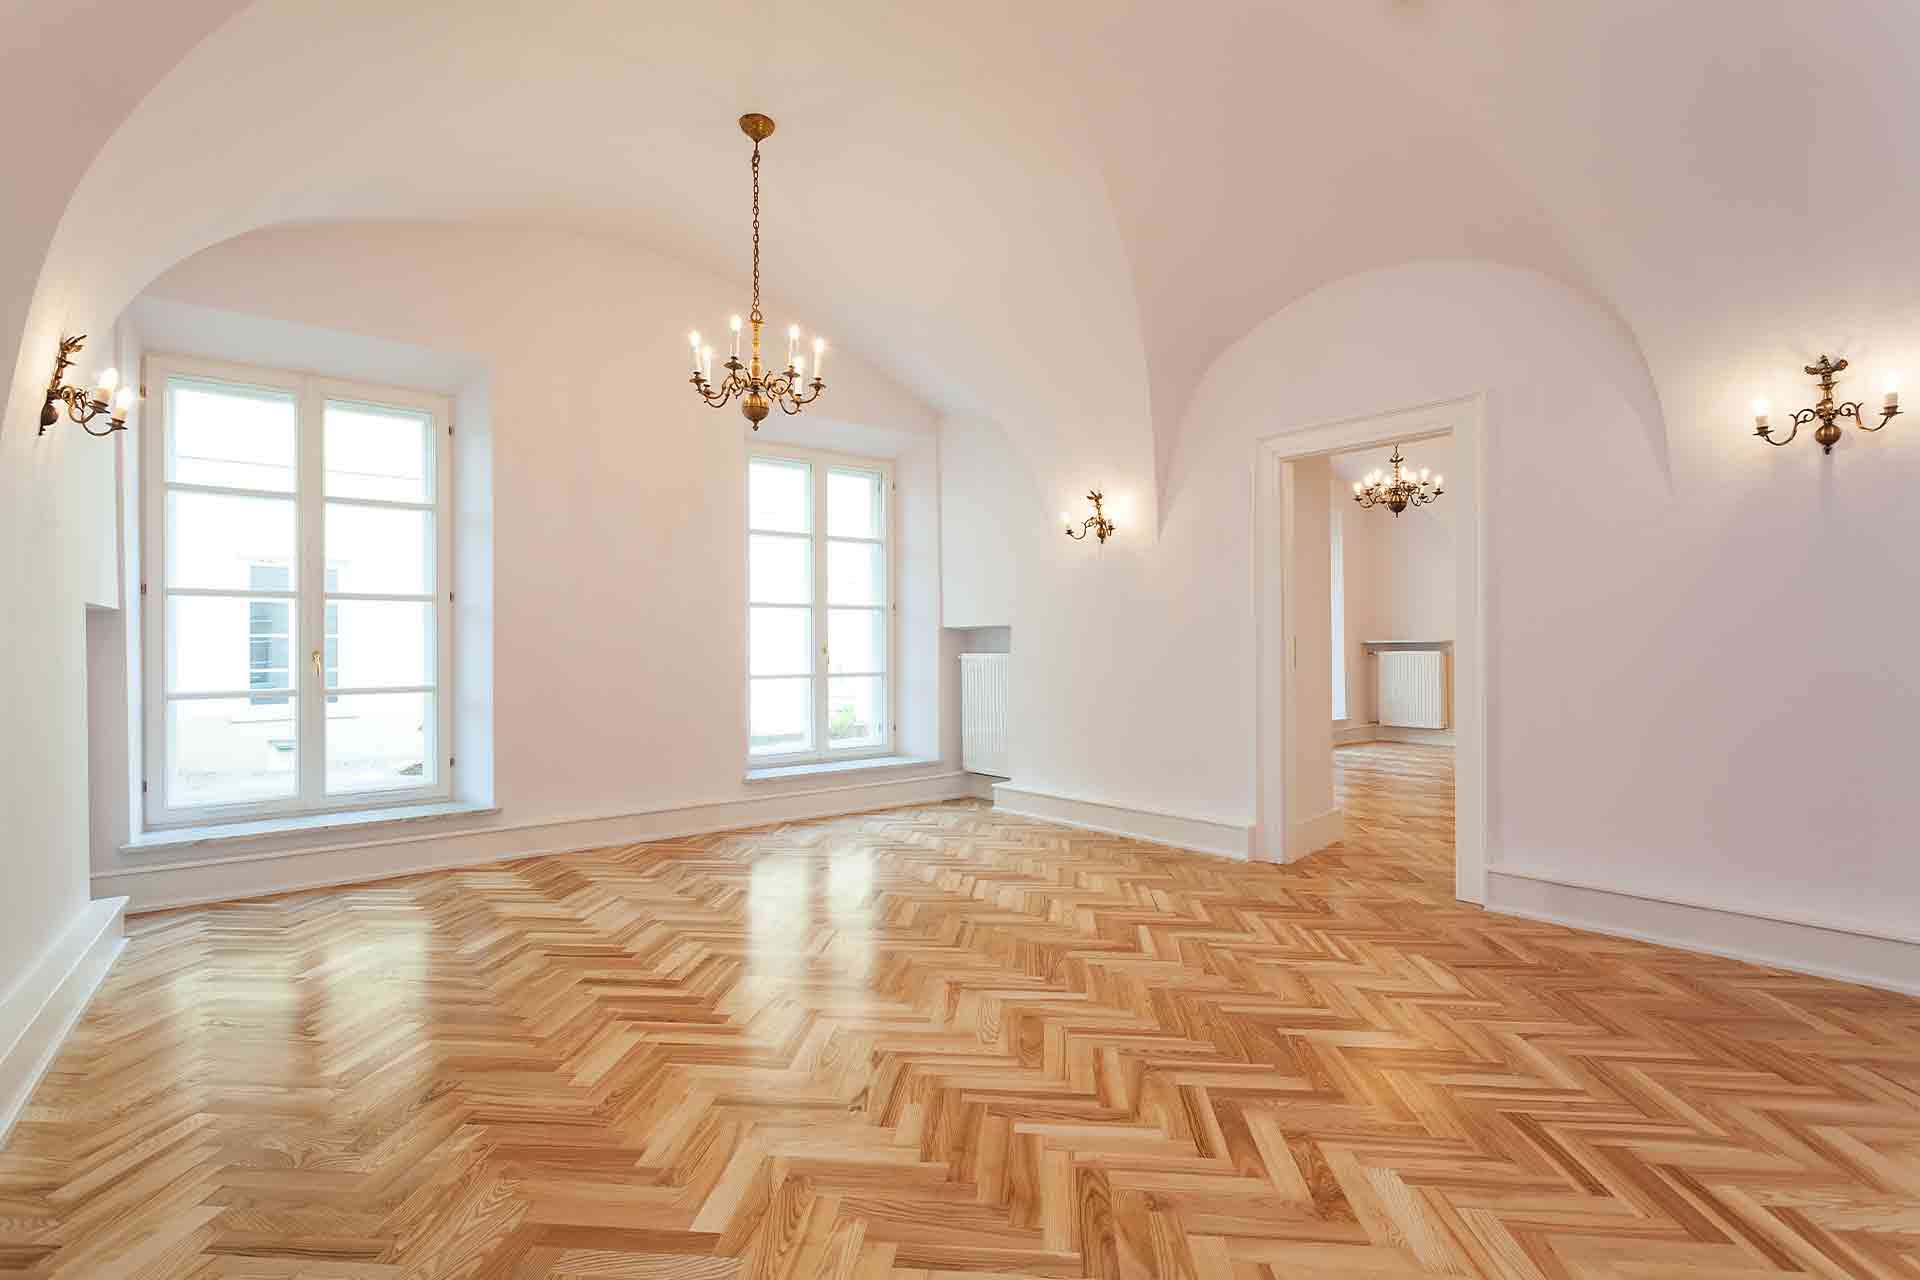 Parquet Flooring Cost, How Much Does It Cost To Fit Parquet Flooring Uk